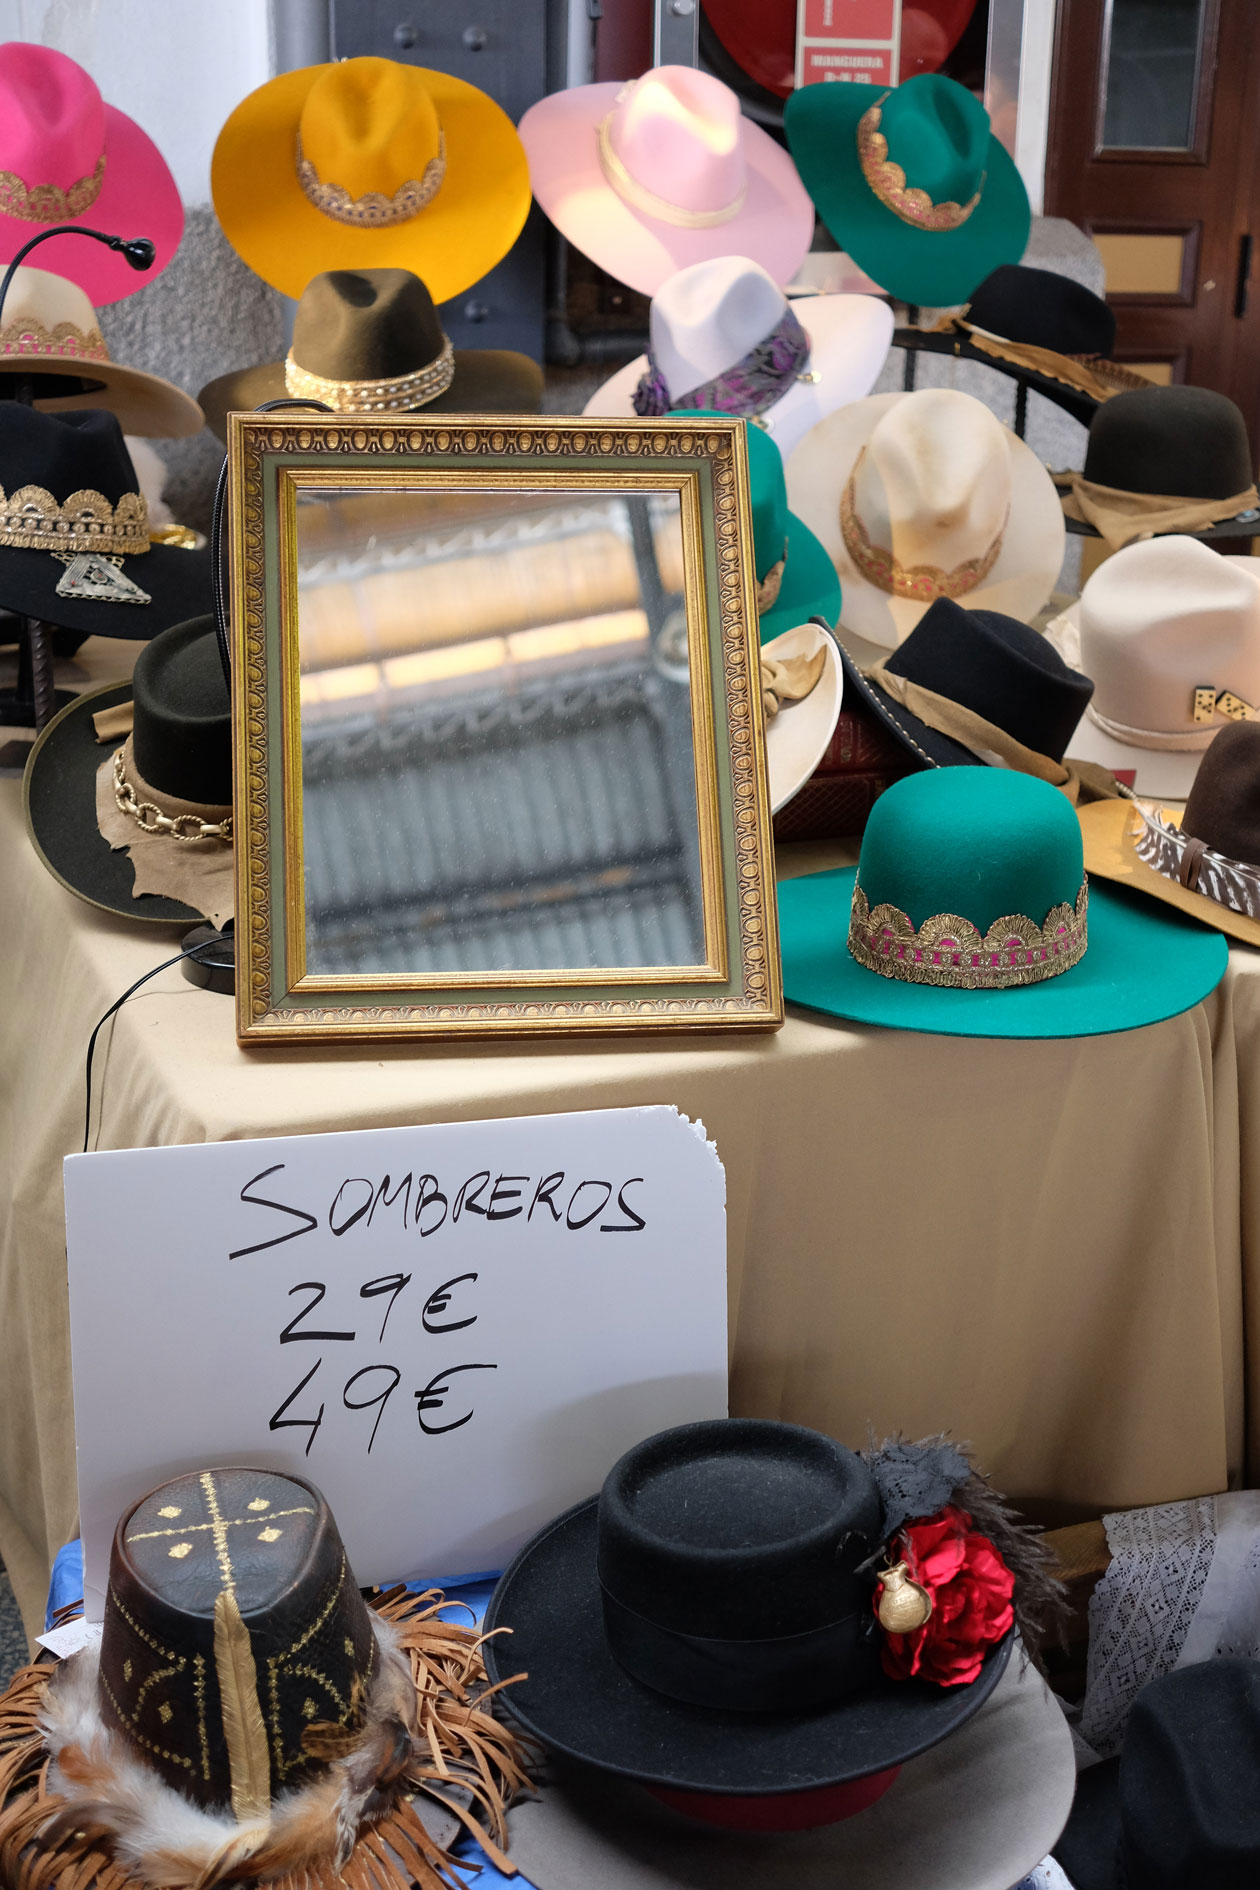 If you're looking for vintage hats in Madrid, the Mercado de Motores is the place to be